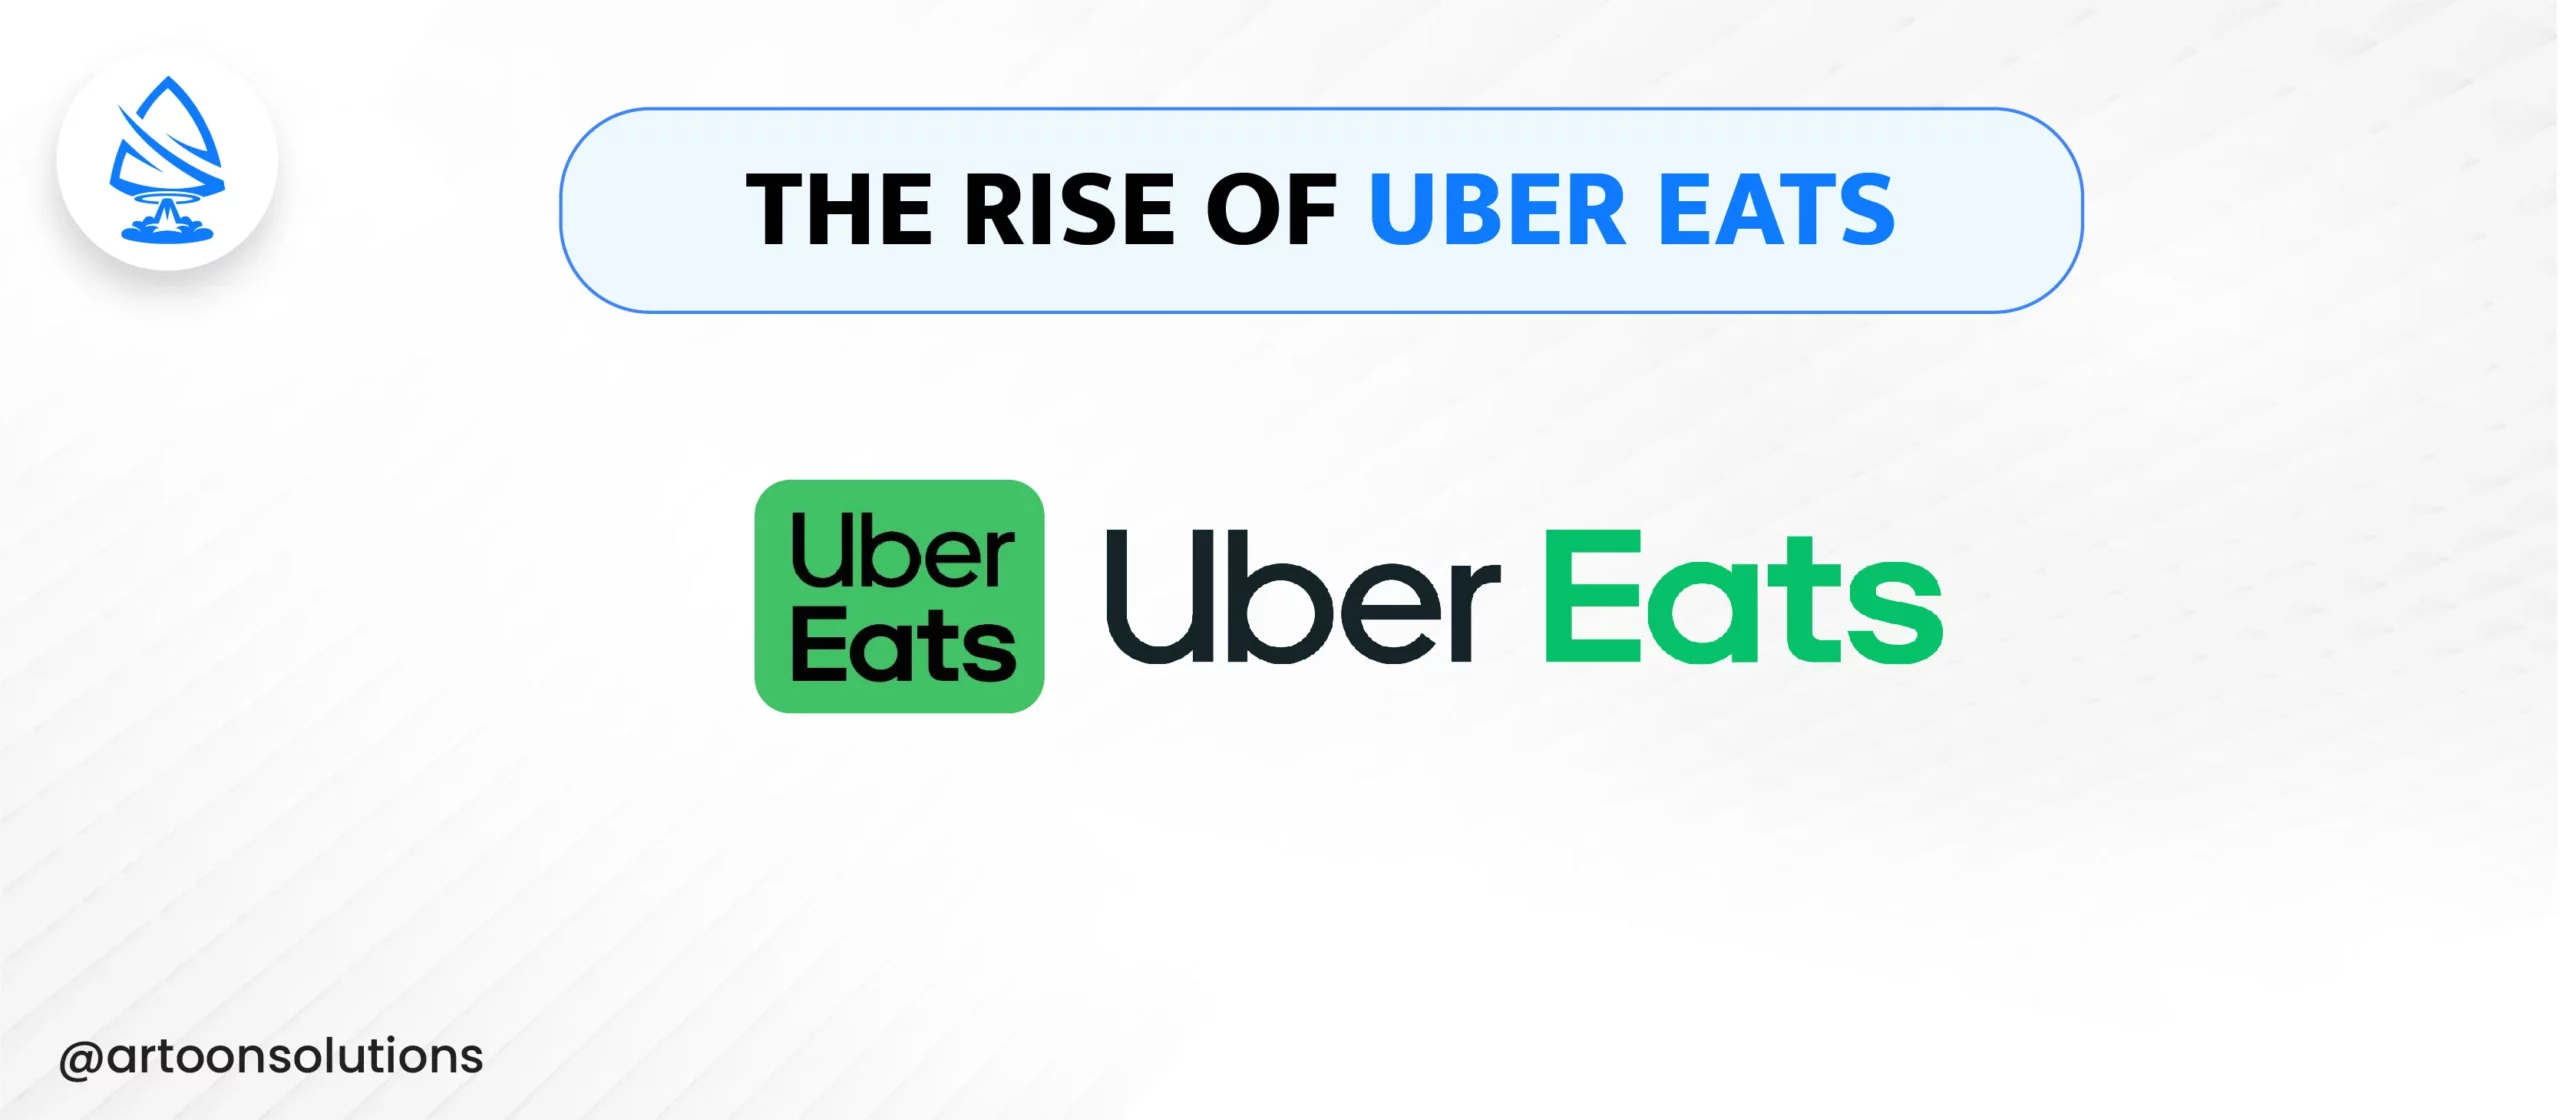 The Rise of Uber Eats